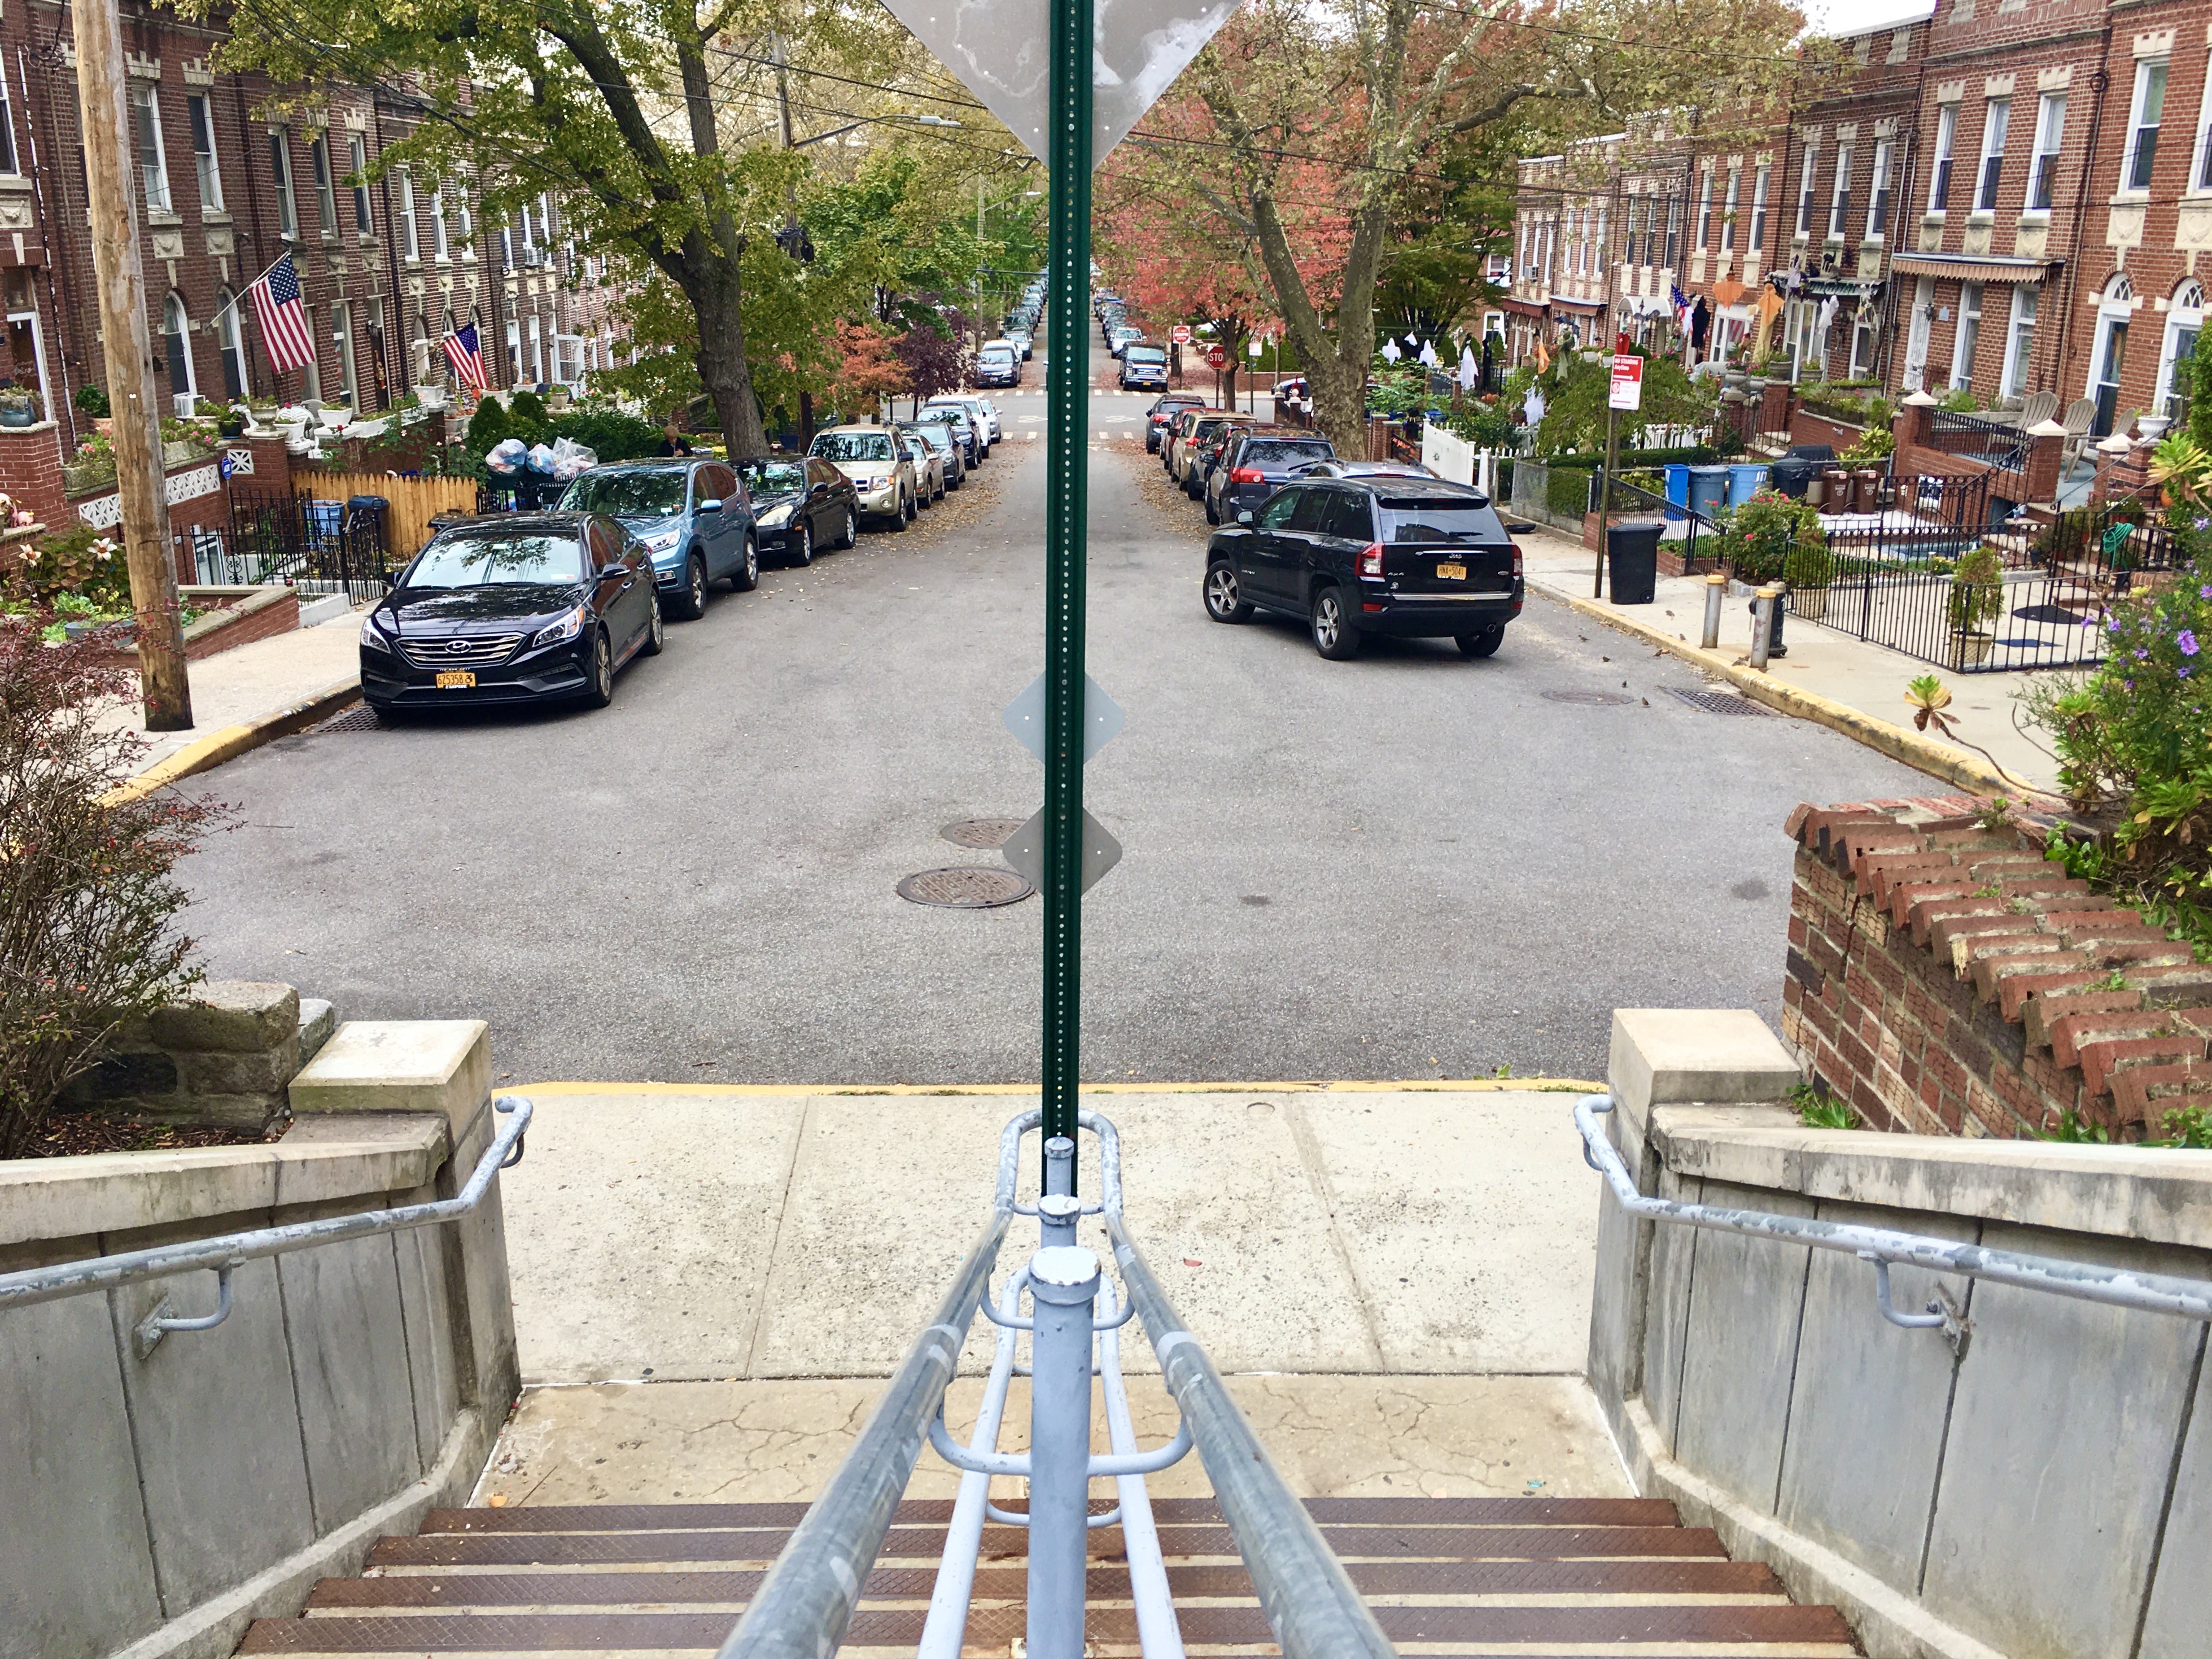 Here’s a view of 74th Street from the staircase that rises above it. Eagle photo by Lore Croghan